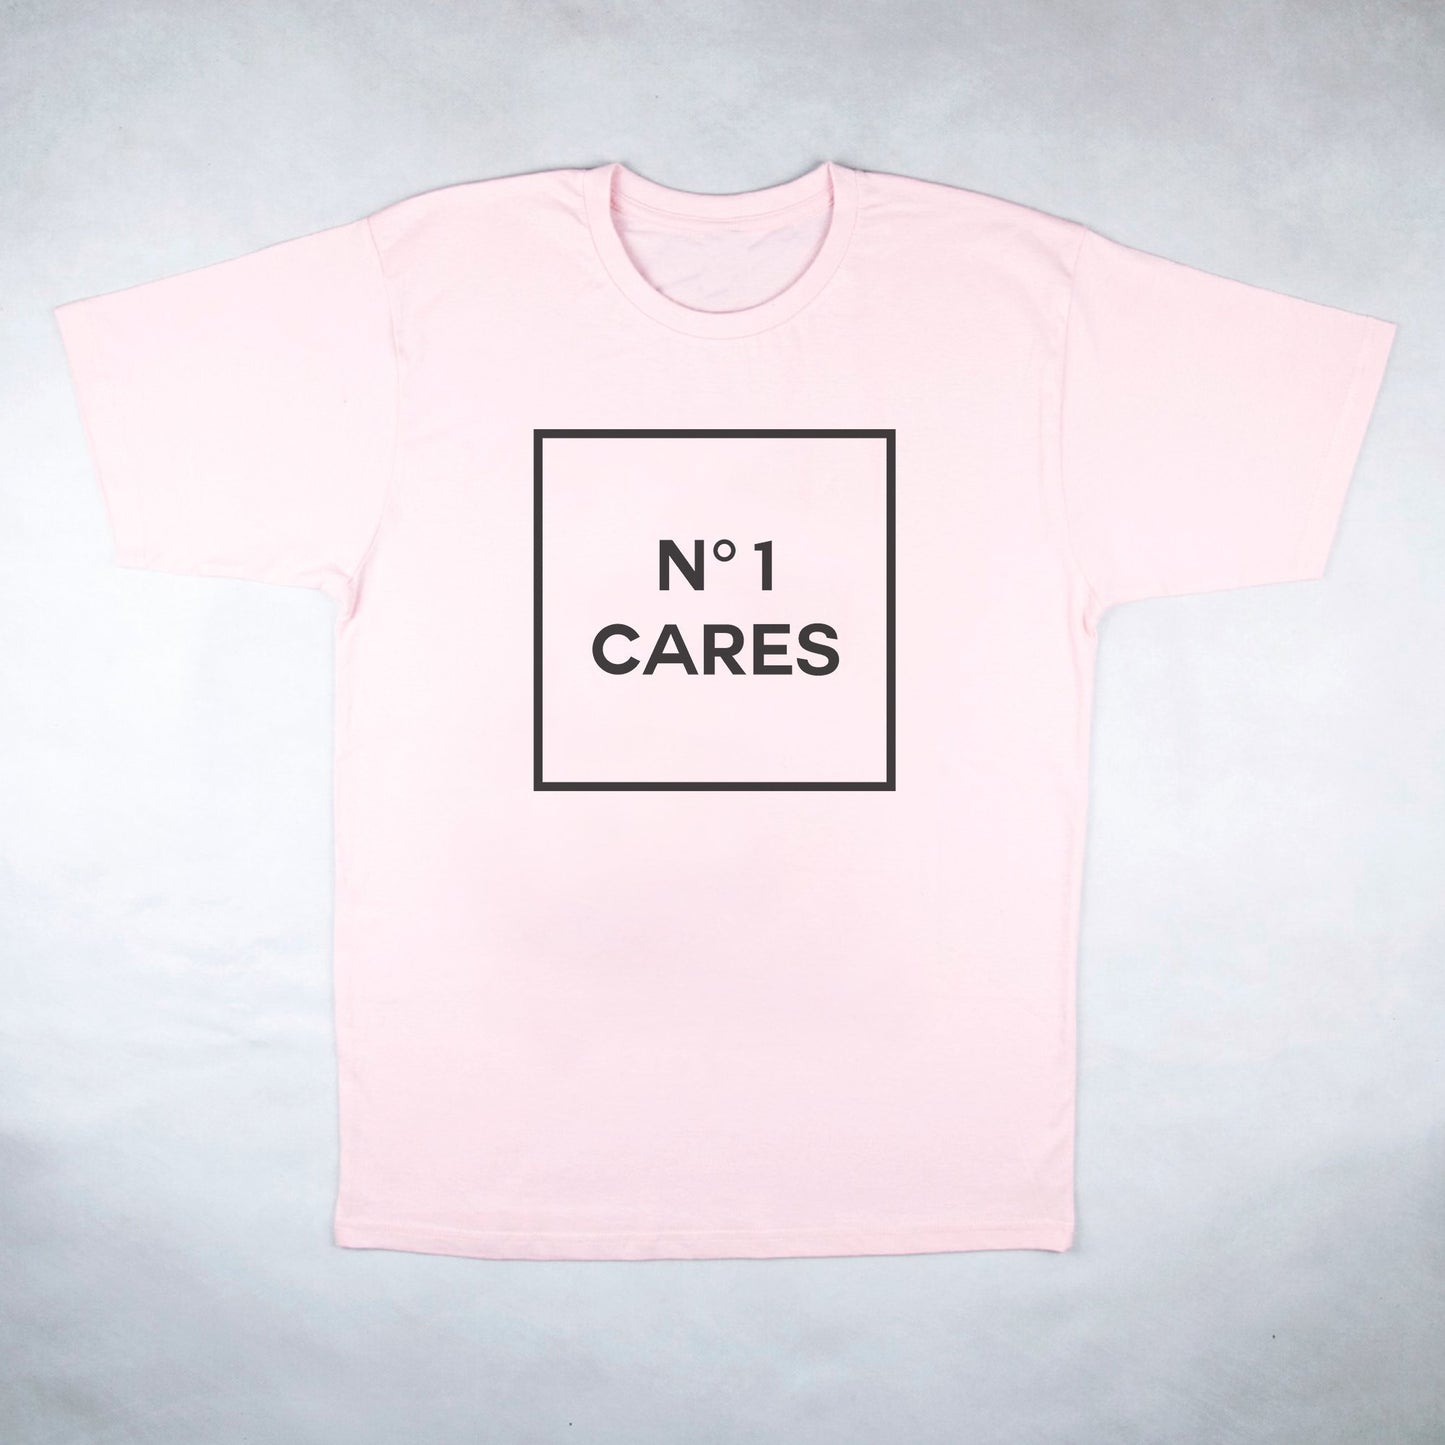 Classy Duds Short Sleeve T-Shirts S / Premium No1 Cares Tee